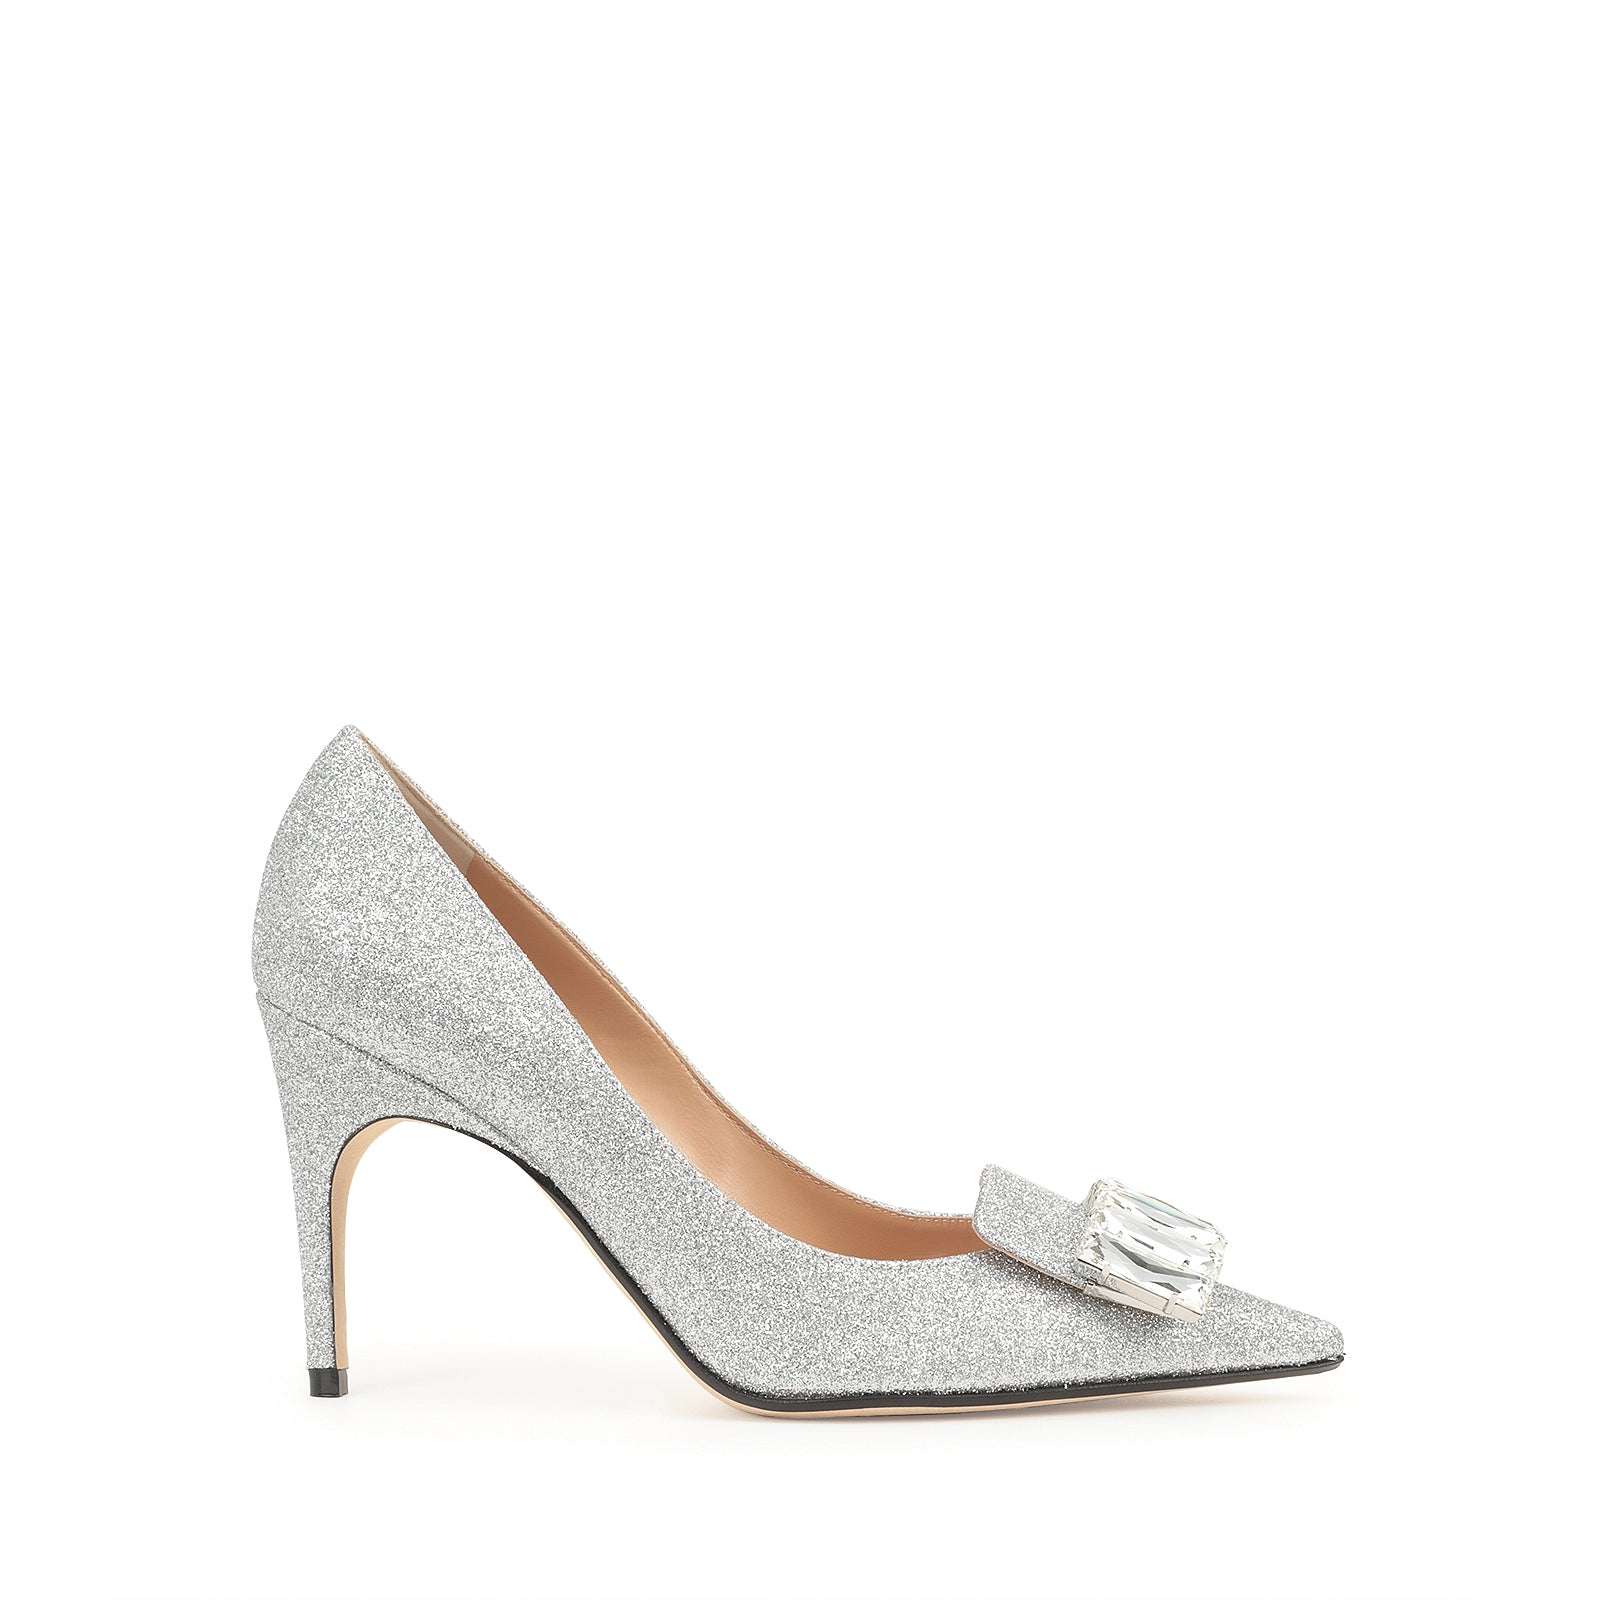 Dune London Attention Glitter Heeled Court Shoes - Silver | very.co.uk